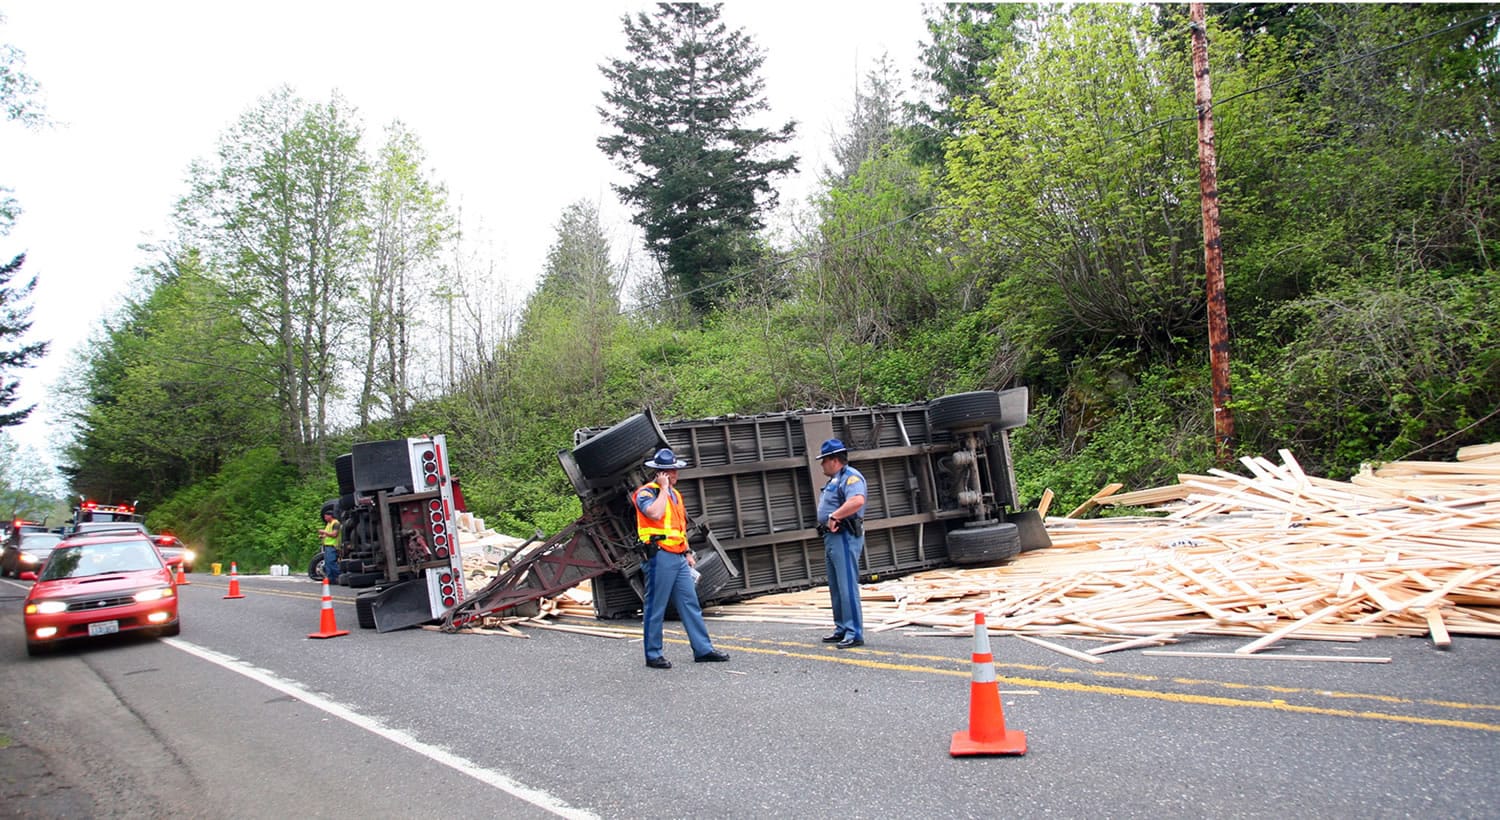 A semi with double flatbed trailers went on its side and dumped a load of lumber on state Highway 14 in Skamania County on Sunday night.